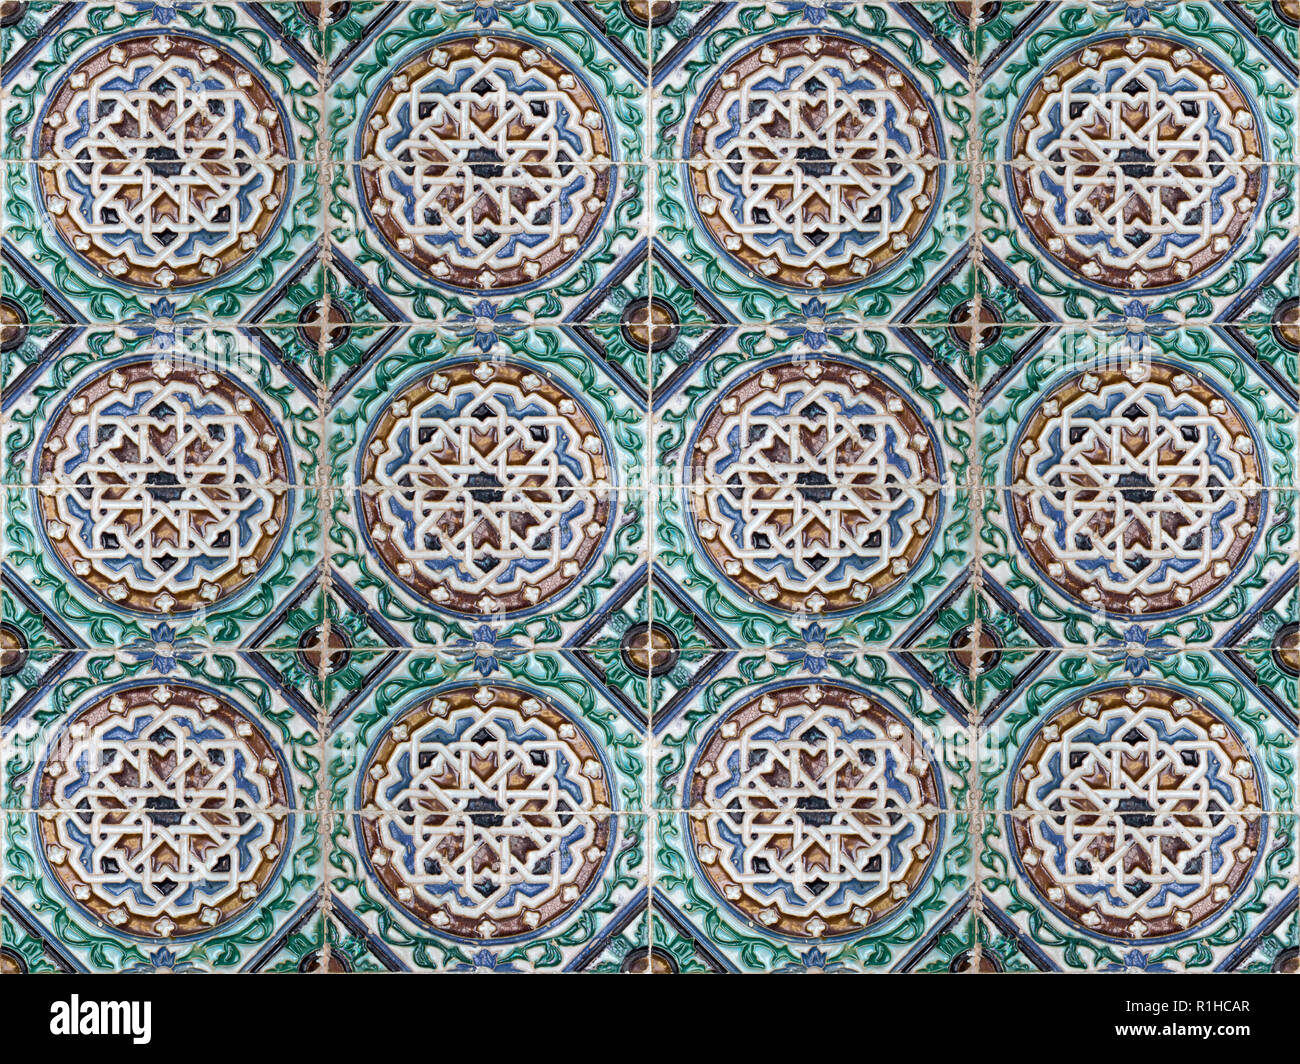 Old ceramic tiles with abstract pattern. Vintage glazed tiles texture and background. Stock Photo